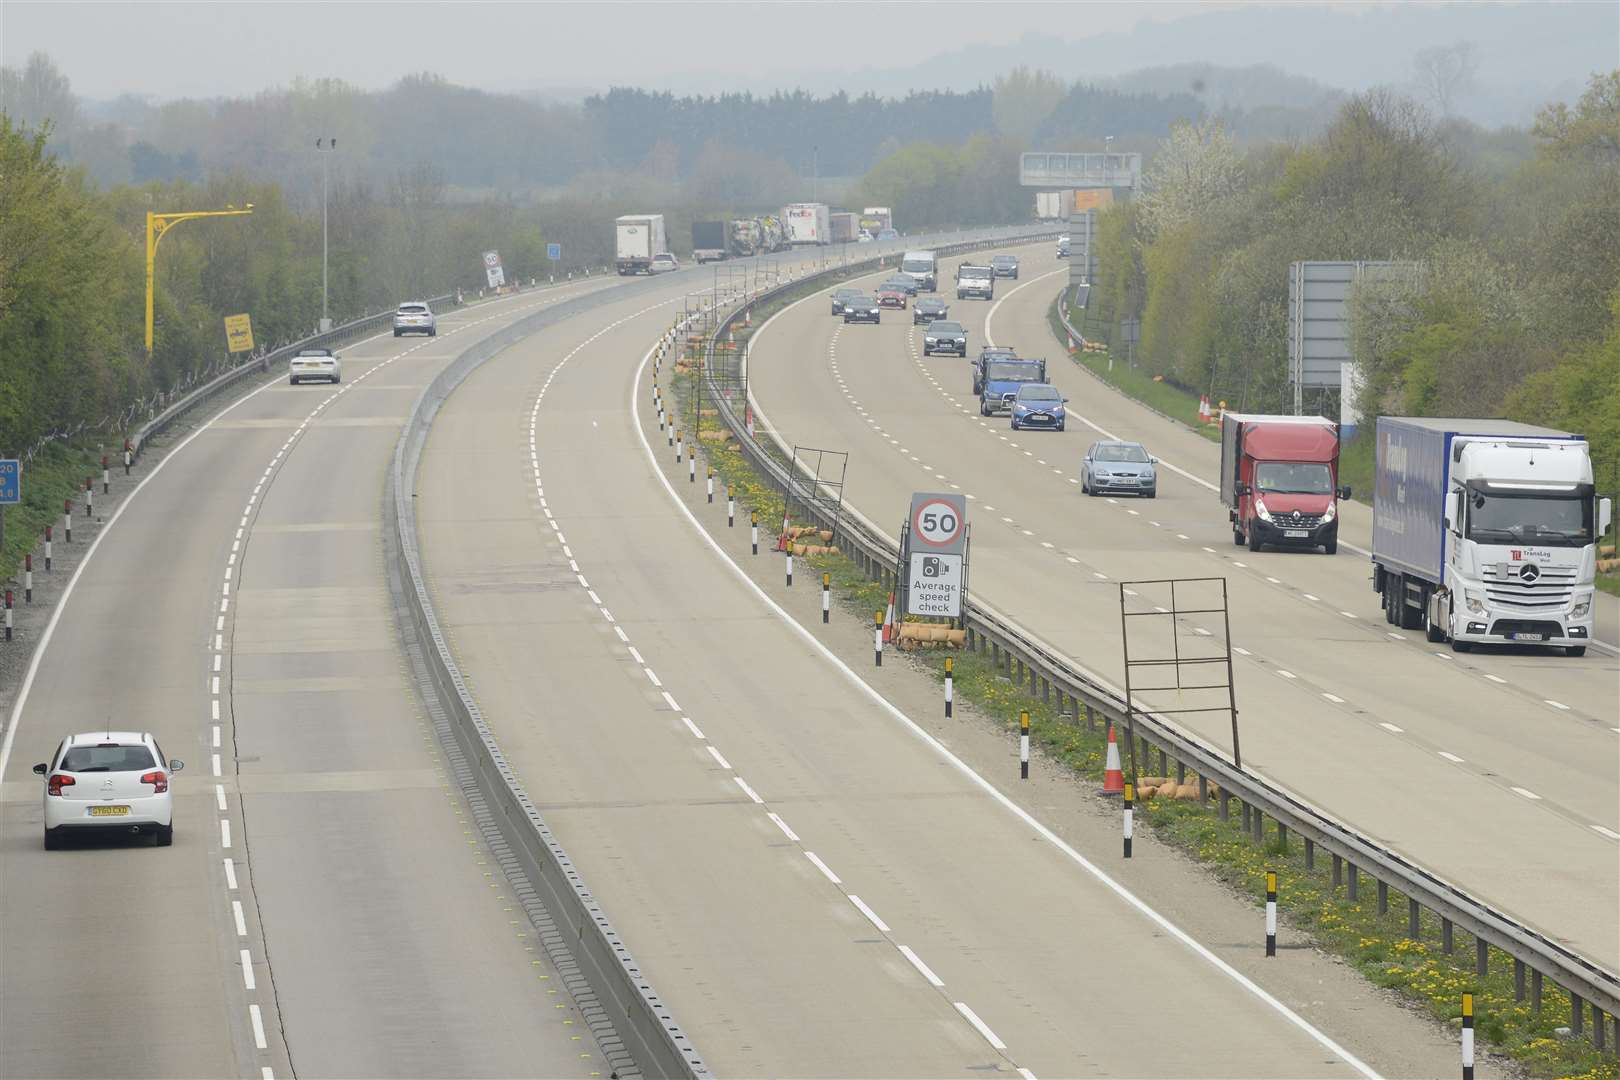 The barrier is still in place on the London-bound carriageway